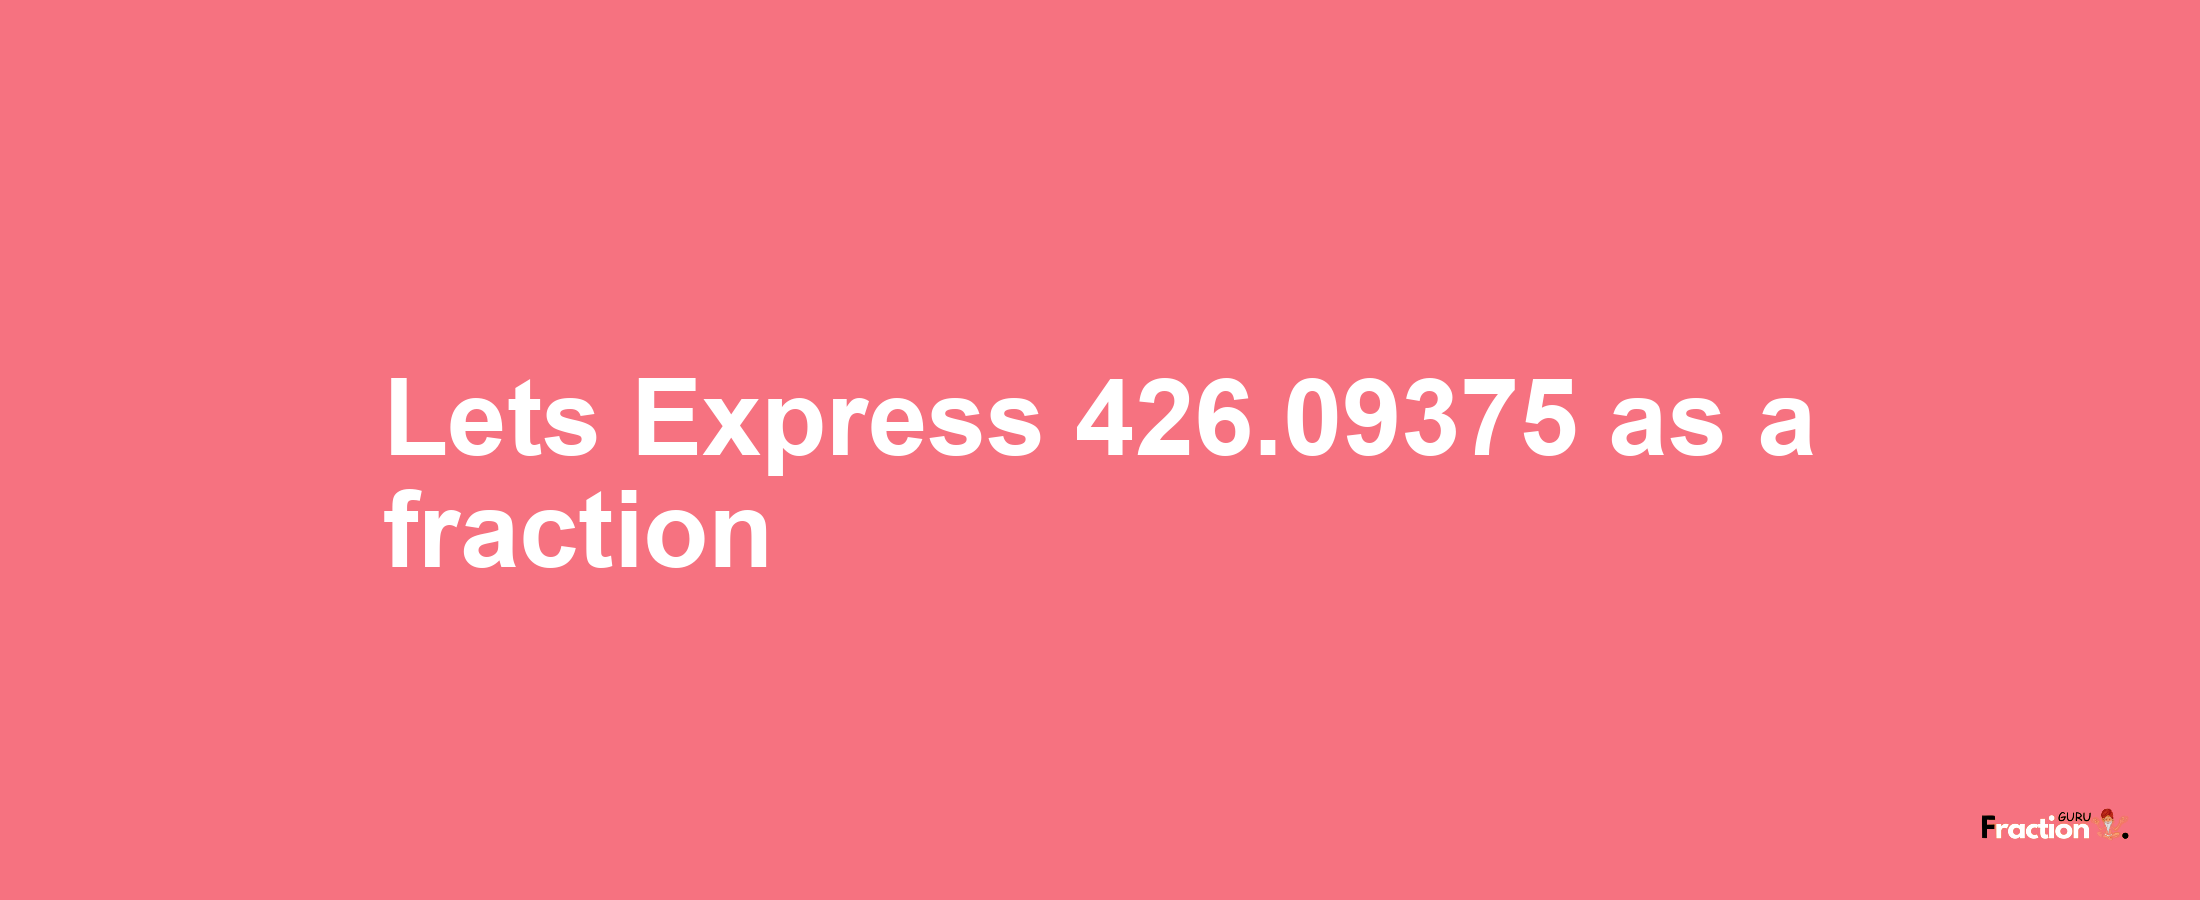 Lets Express 426.09375 as afraction